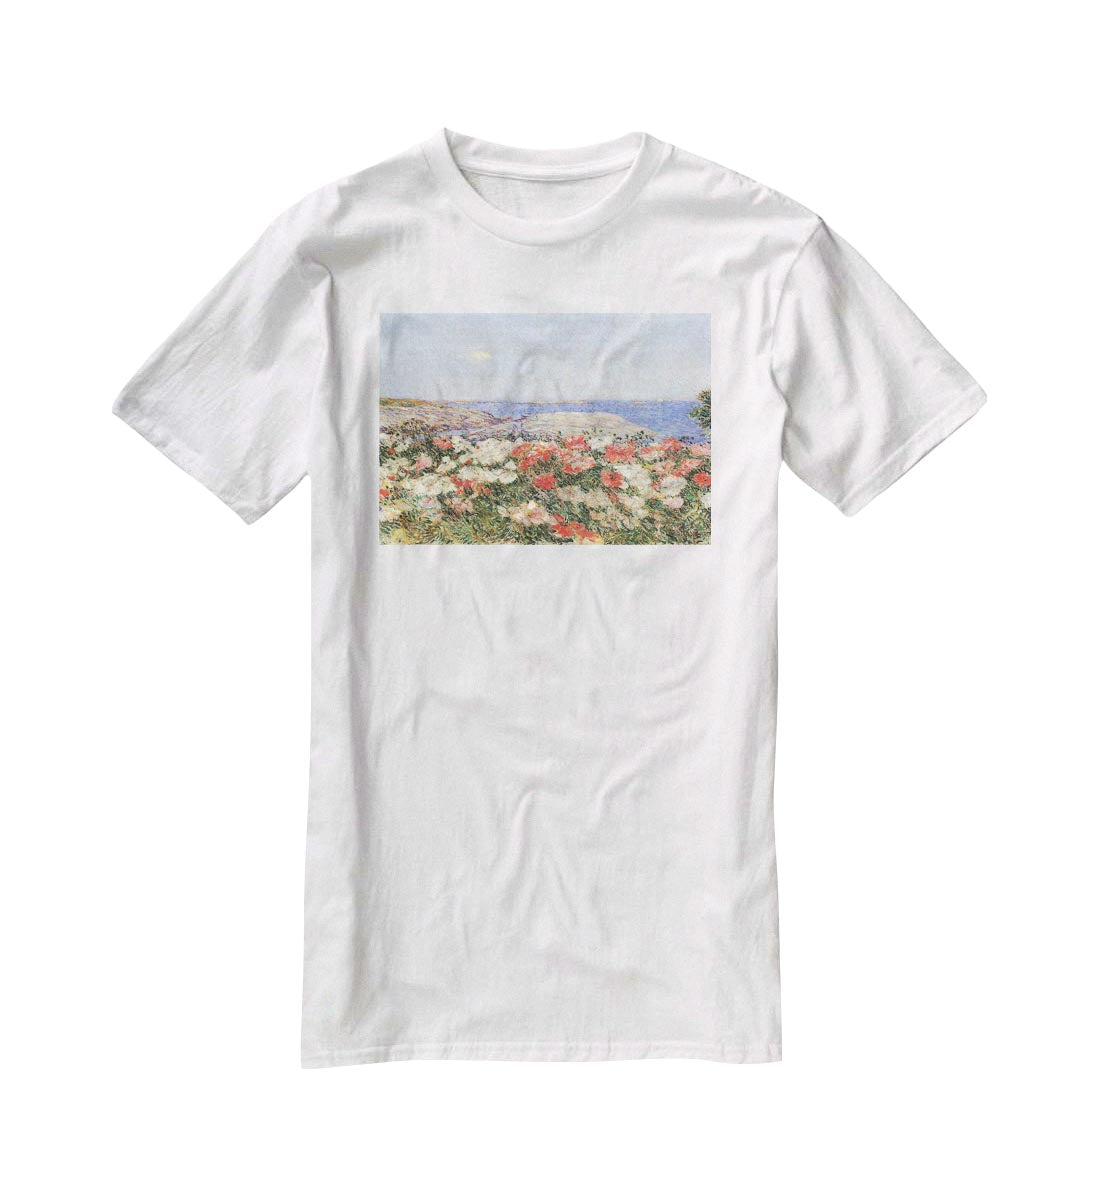 Poppies on the Isles of Shoals by Hassam T-Shirt - Canvas Art Rocks - 5